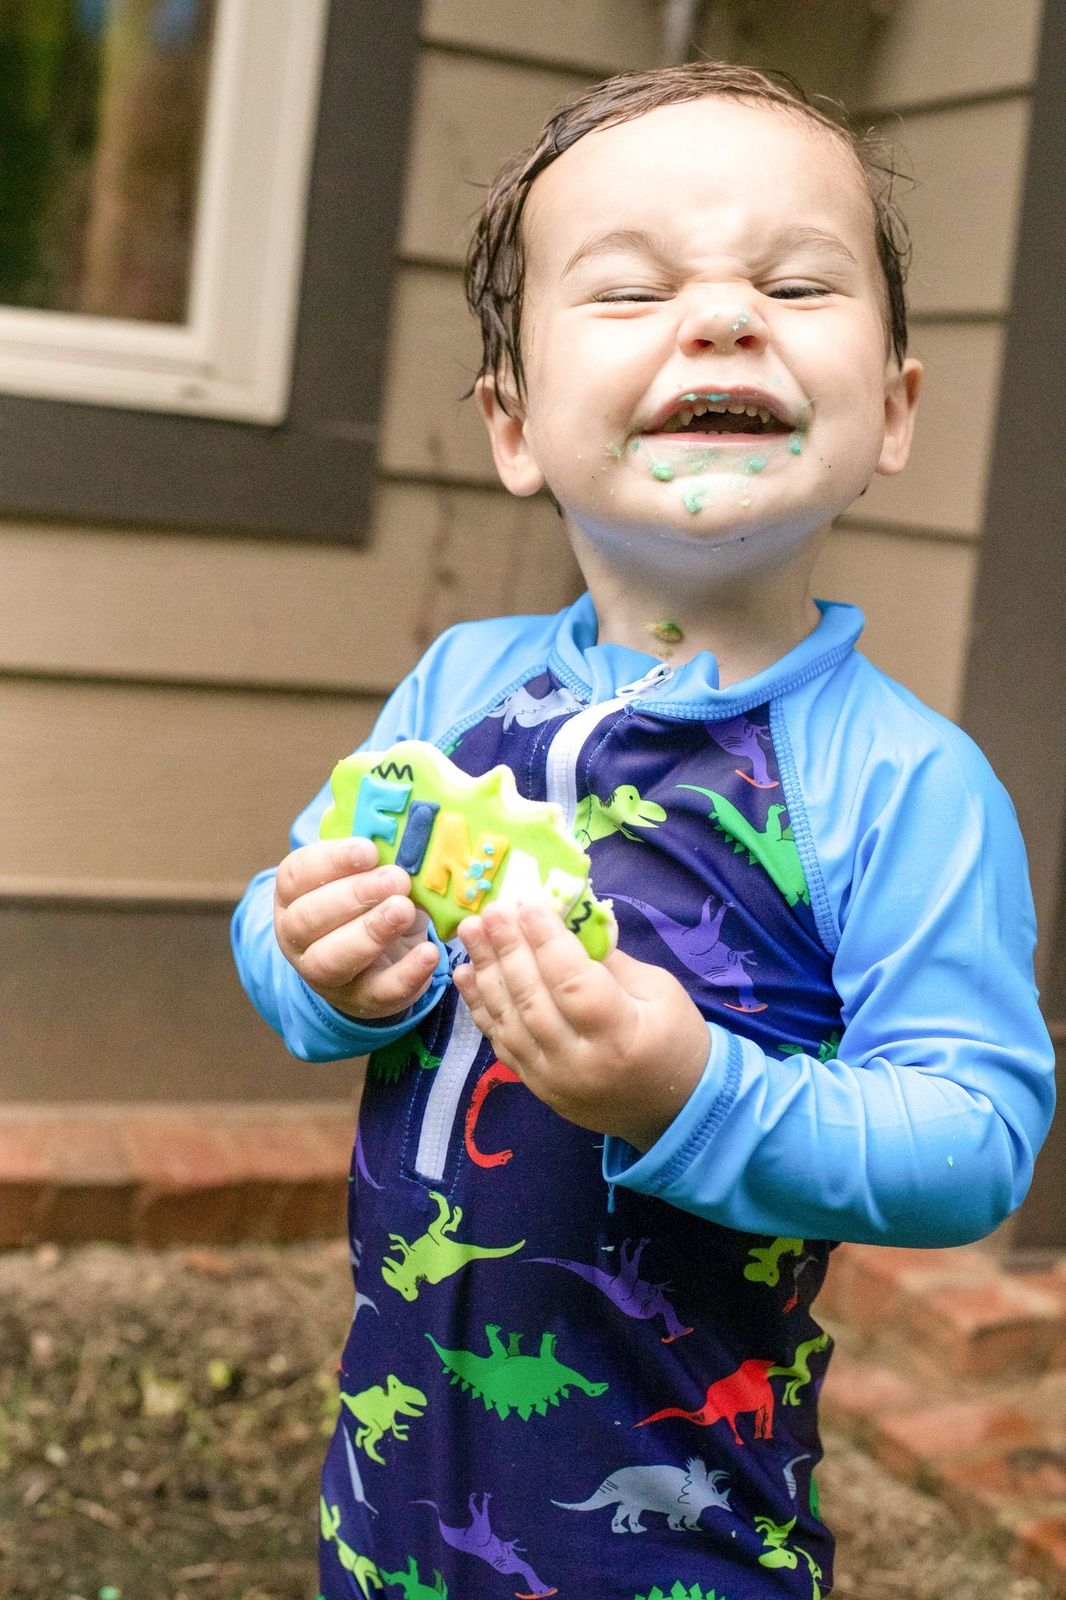 Dino Birthday Party by Alabama Family + Lifestyle blogger, Heather Brown // My Life Well Loved